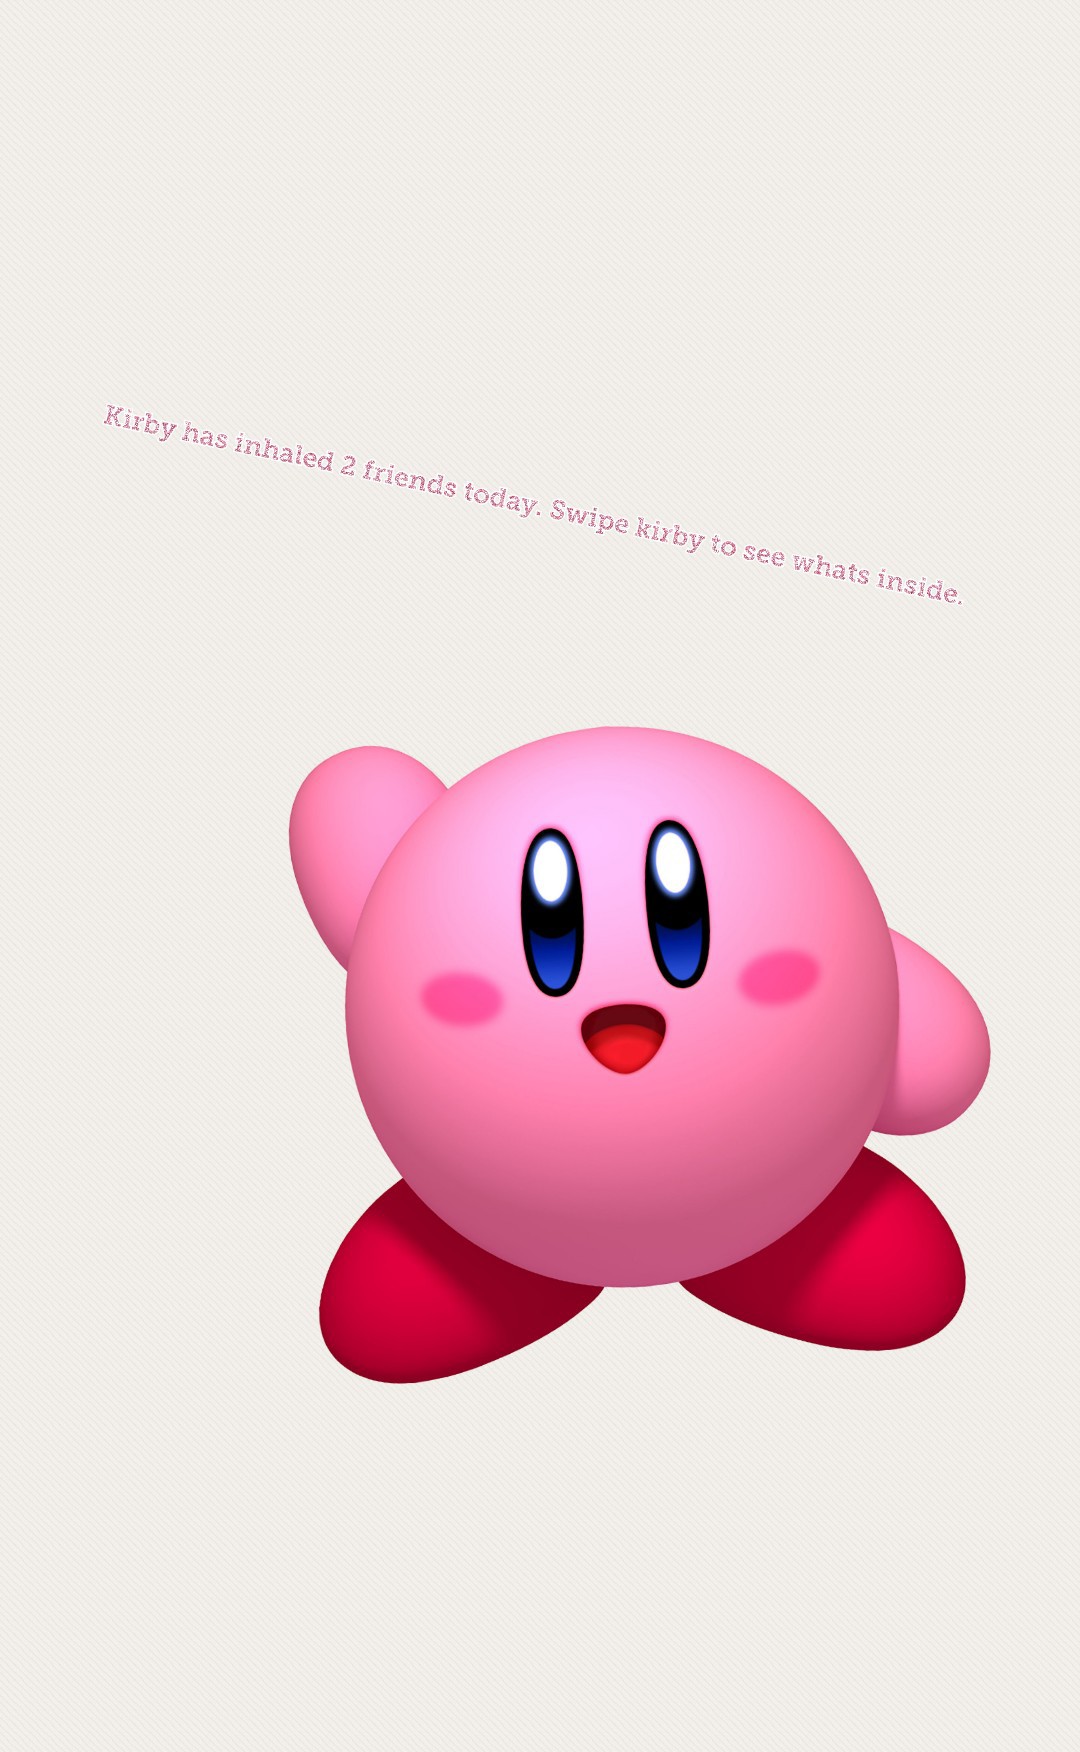 Kirby has inhaled 2 friends today. Swipe kirby to see whats inside.